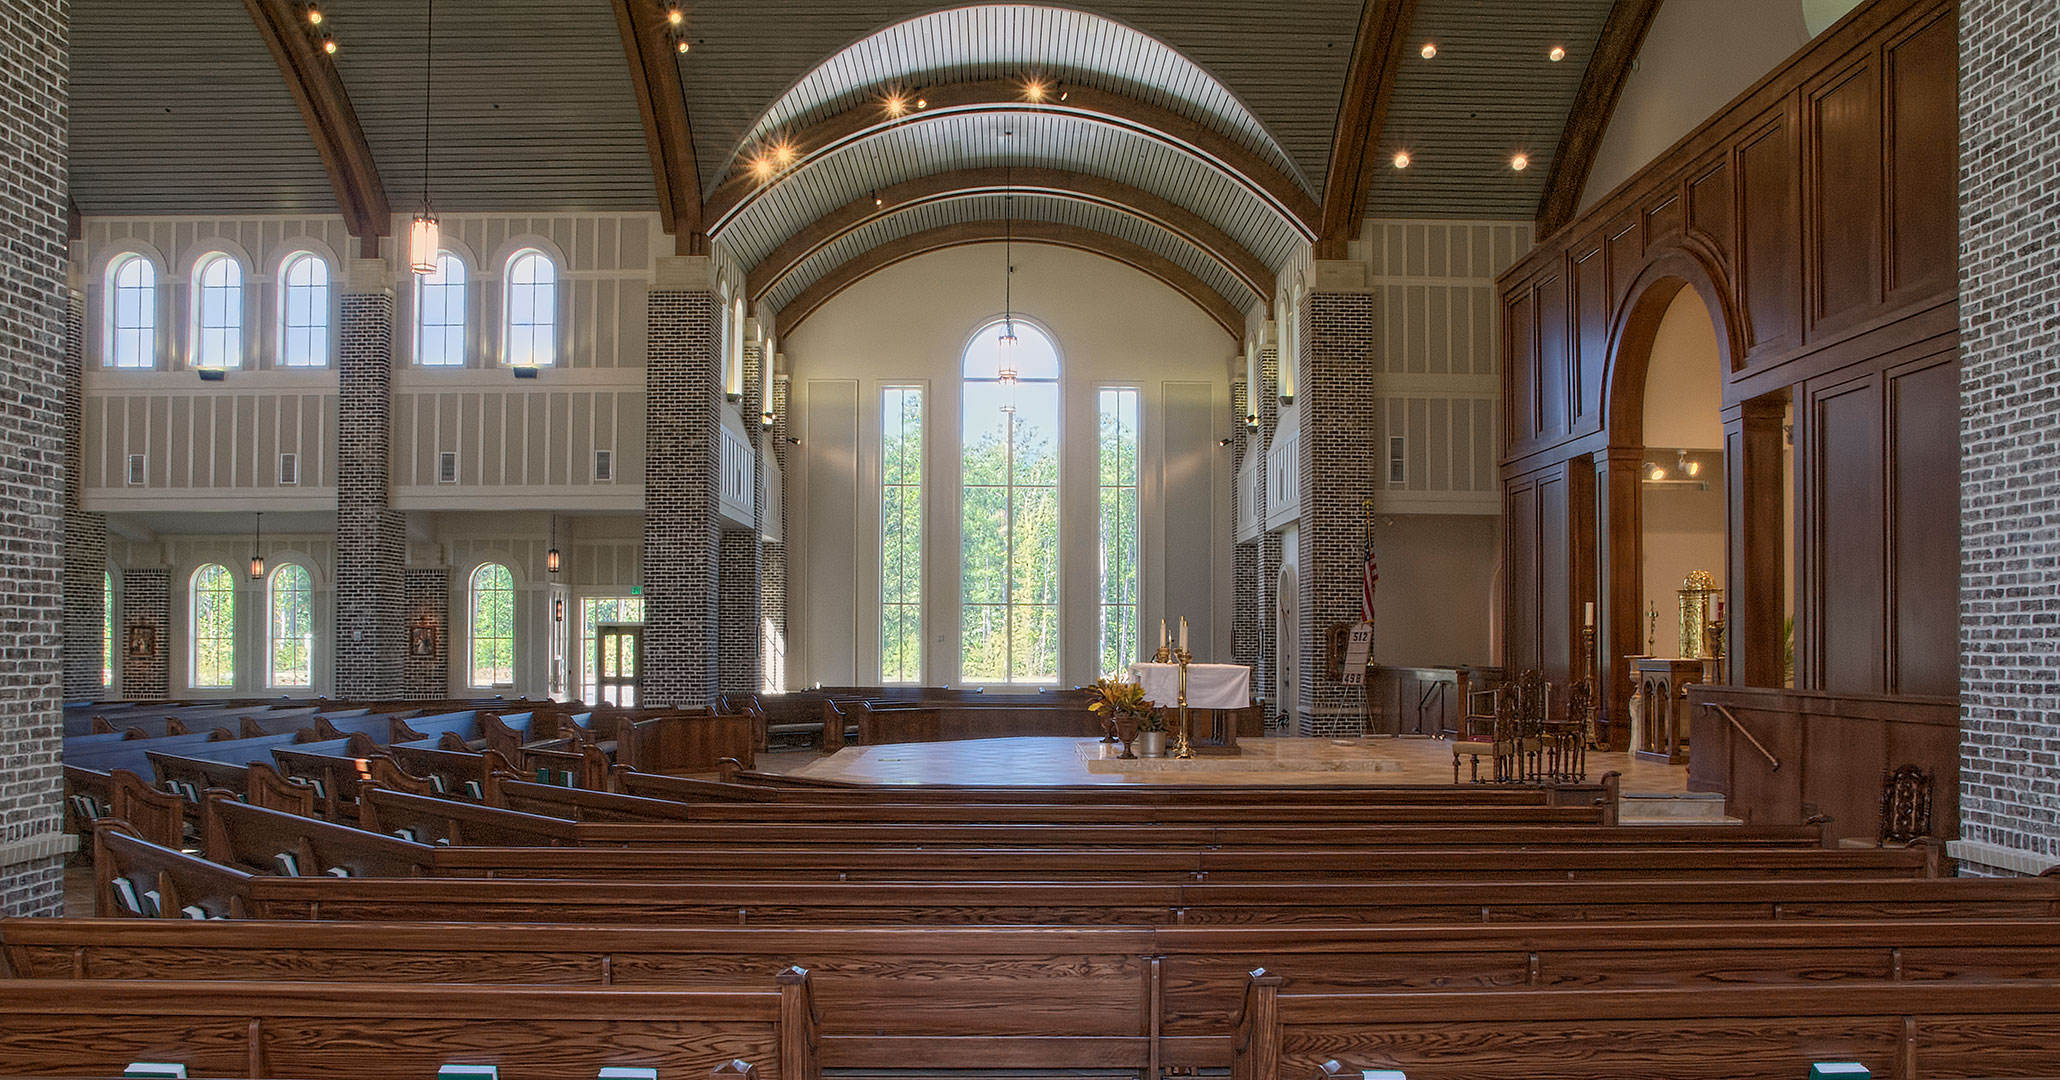 Boudreaux architects designed and built St. Anne in Richmond Hill, GA’s expansion.